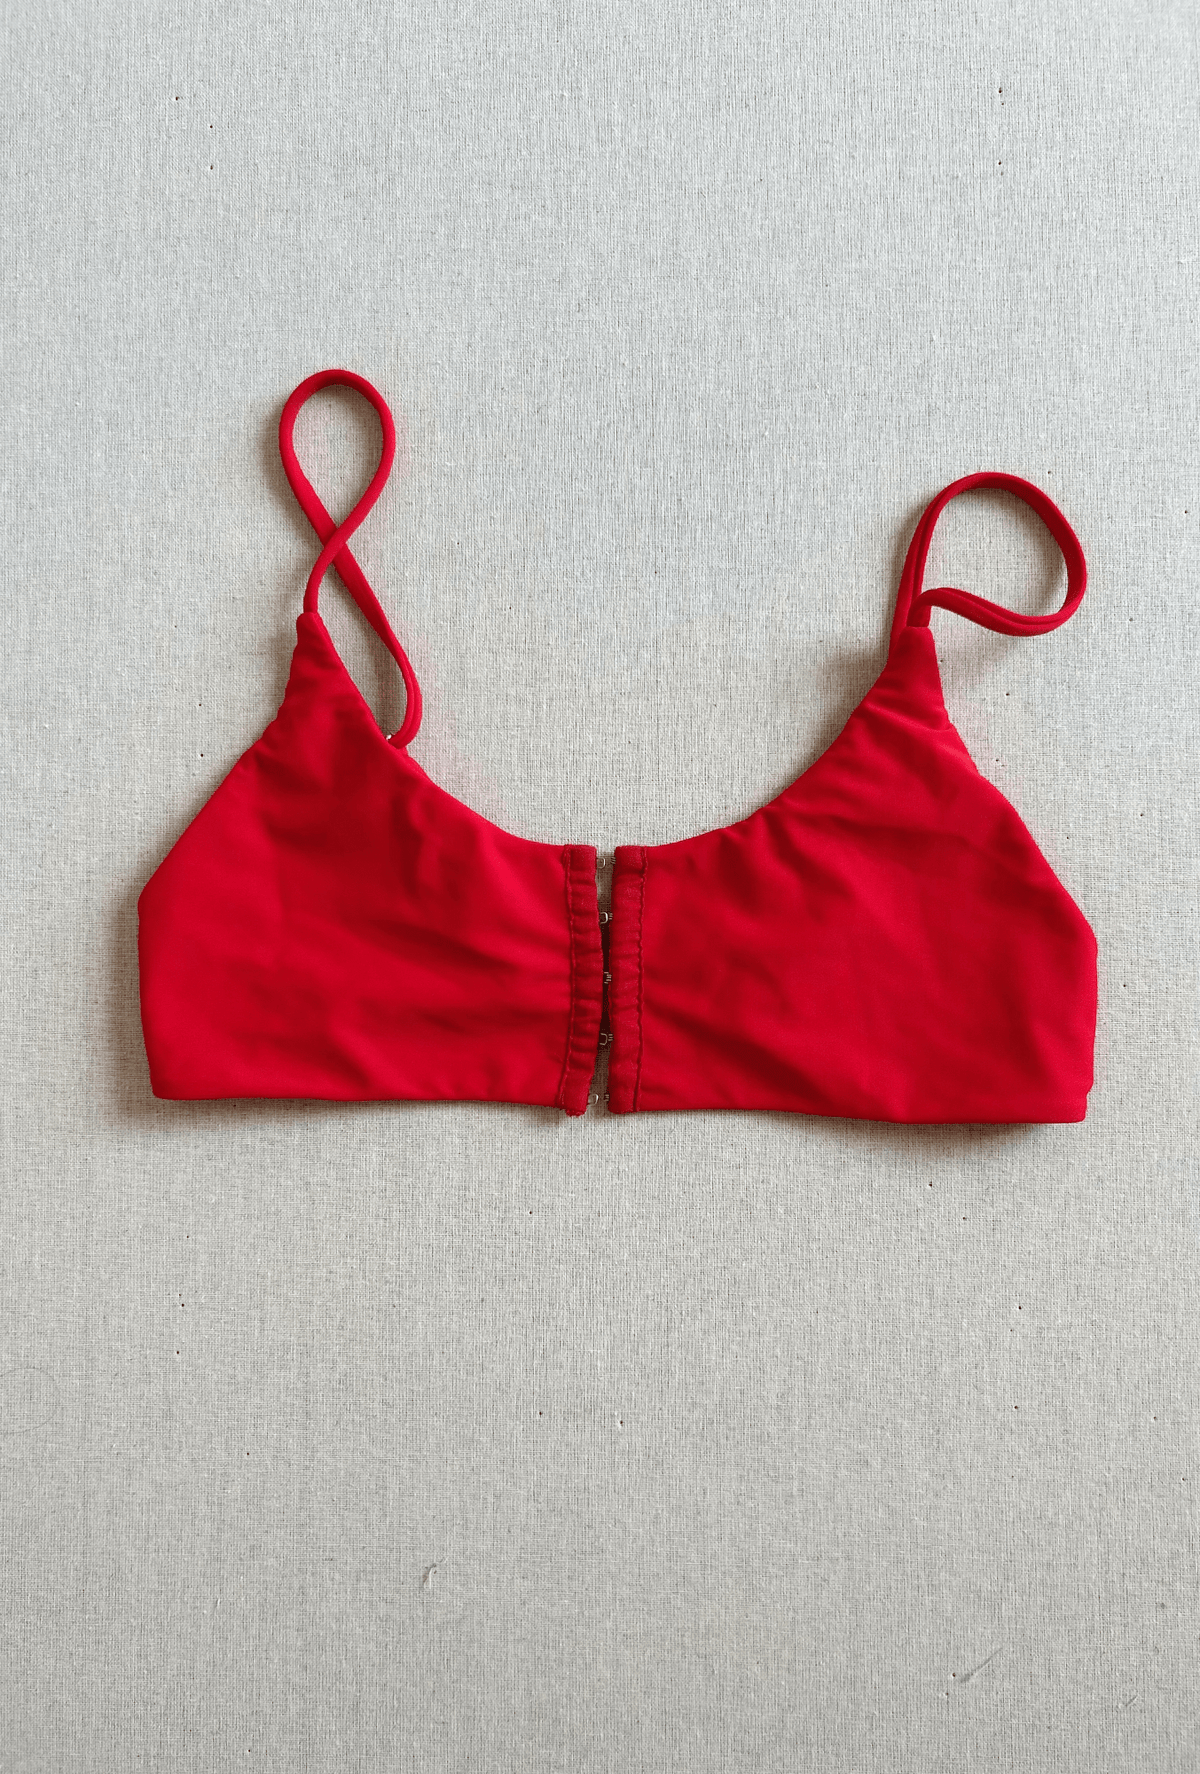 CLASP TOP IN CHERRY RED - SIZE LARGE